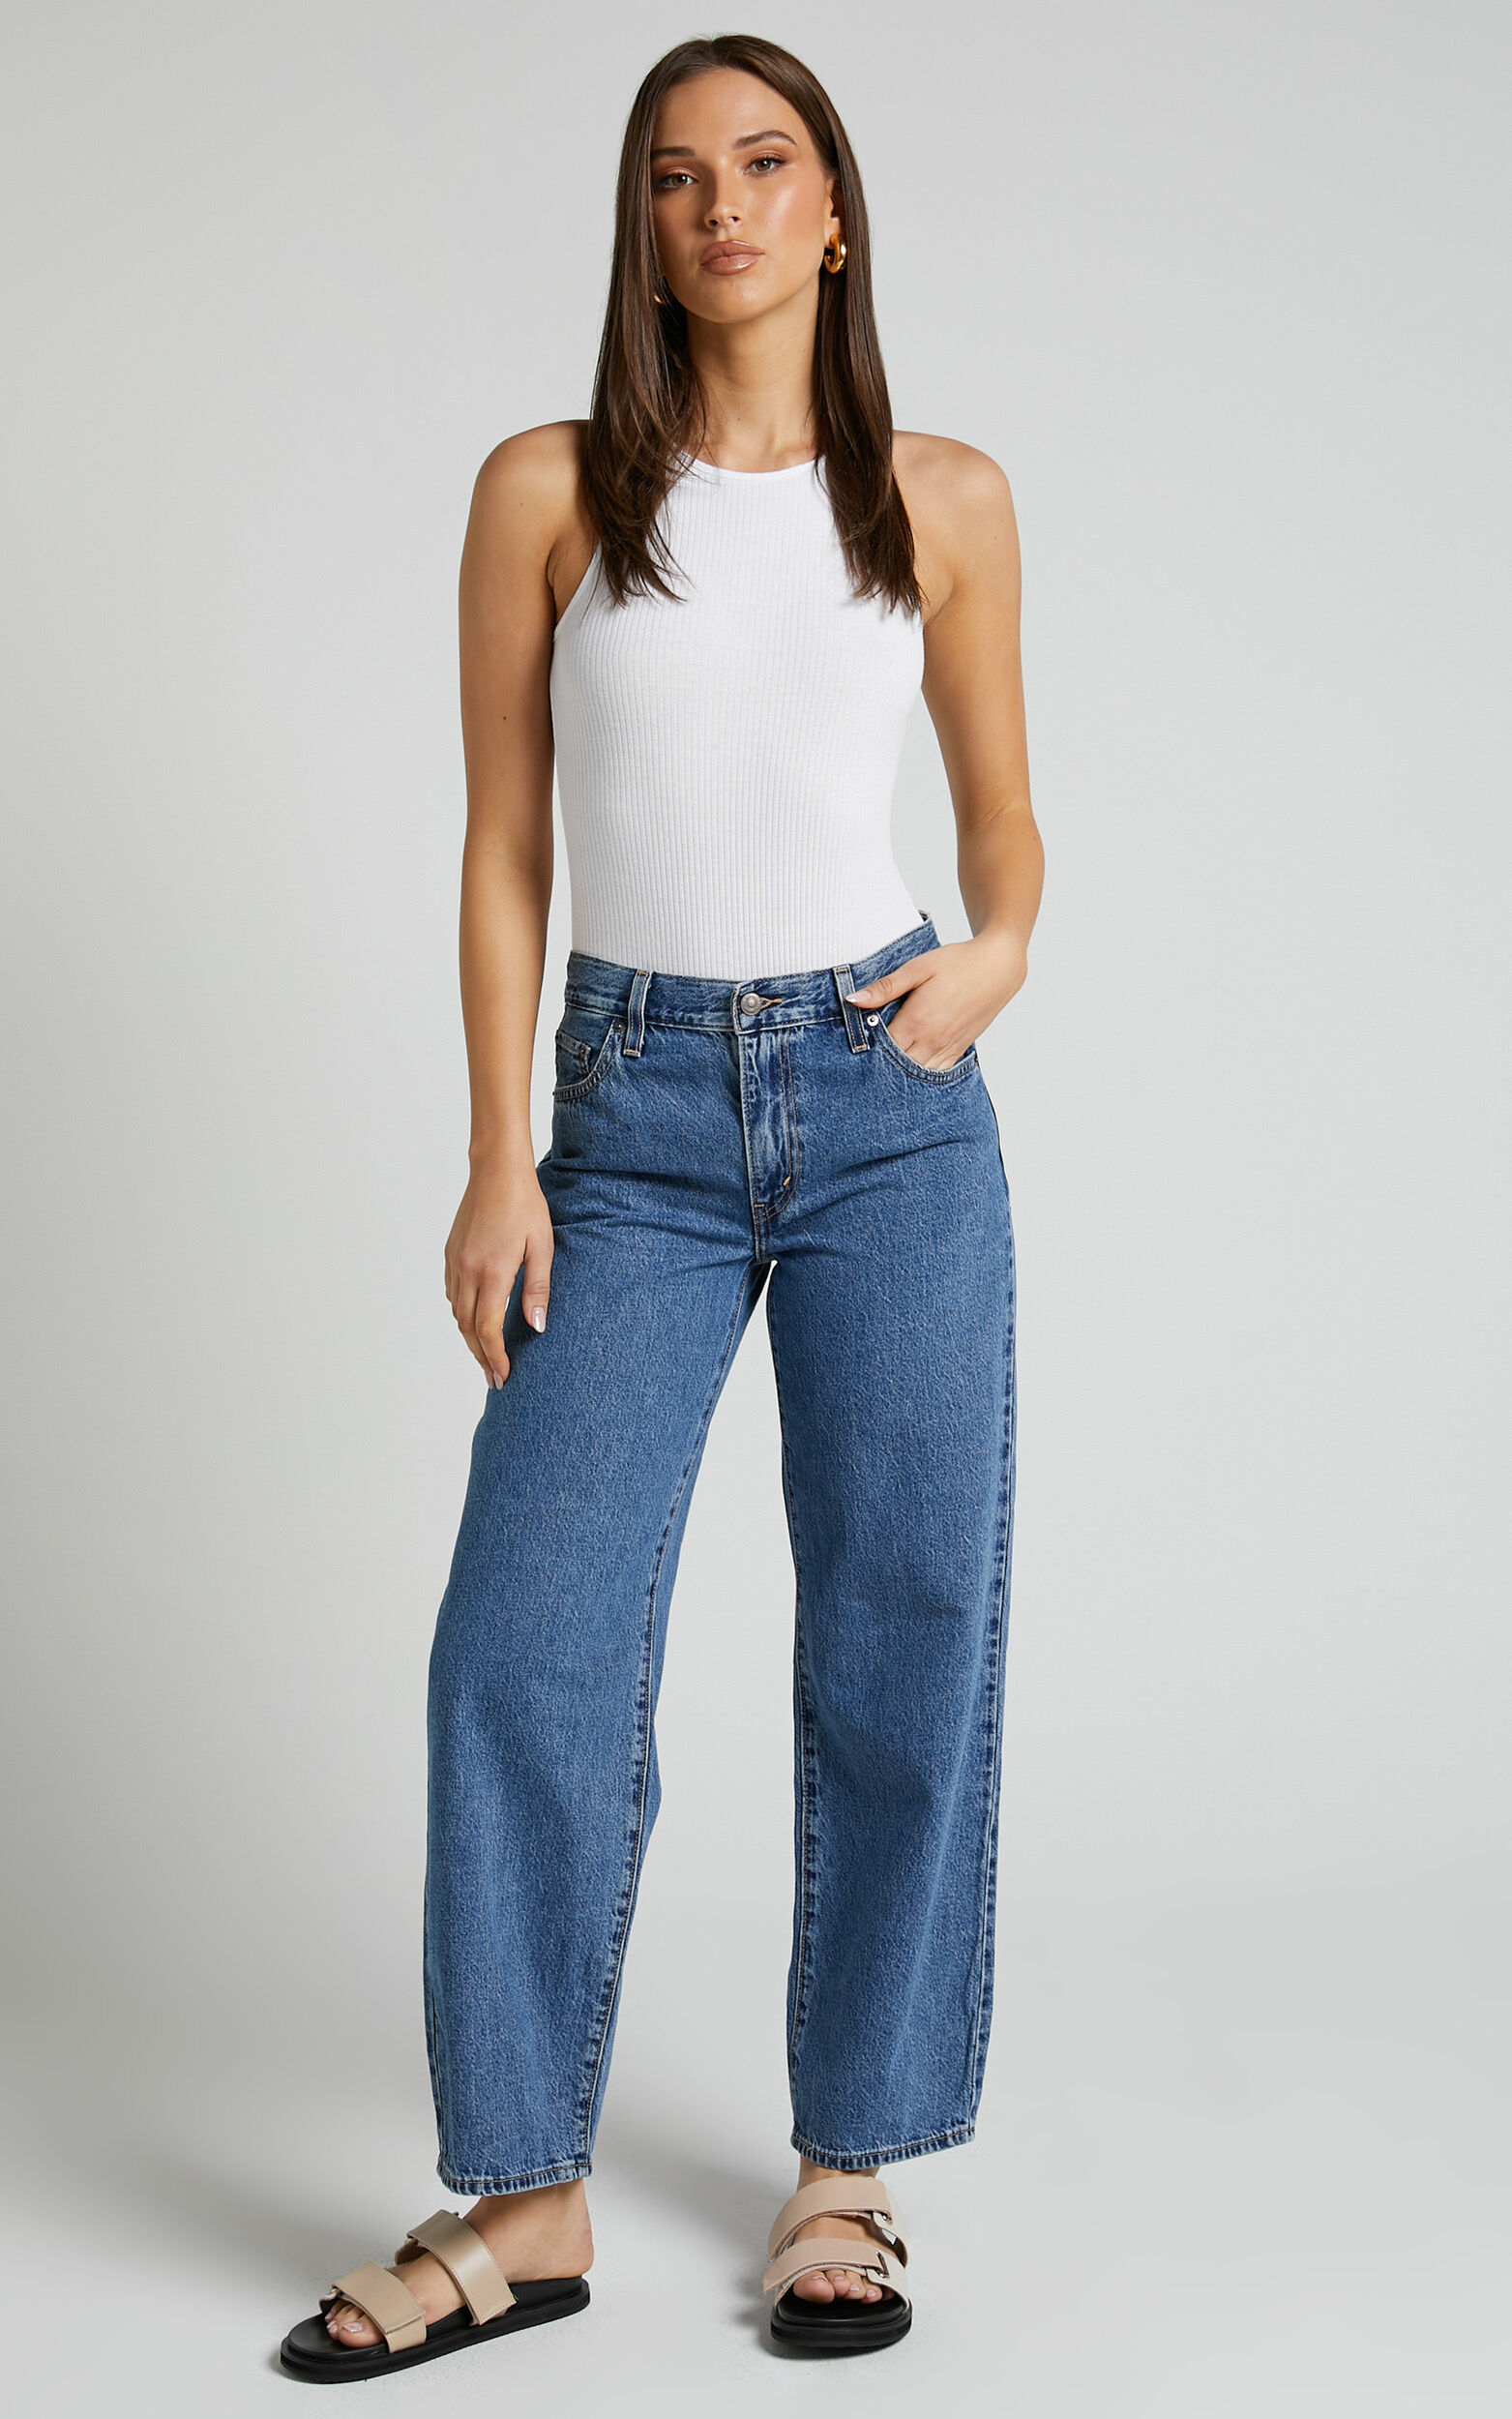 Levi's - Baggy Dad Jeans in Hold My Purse | Showpo USA